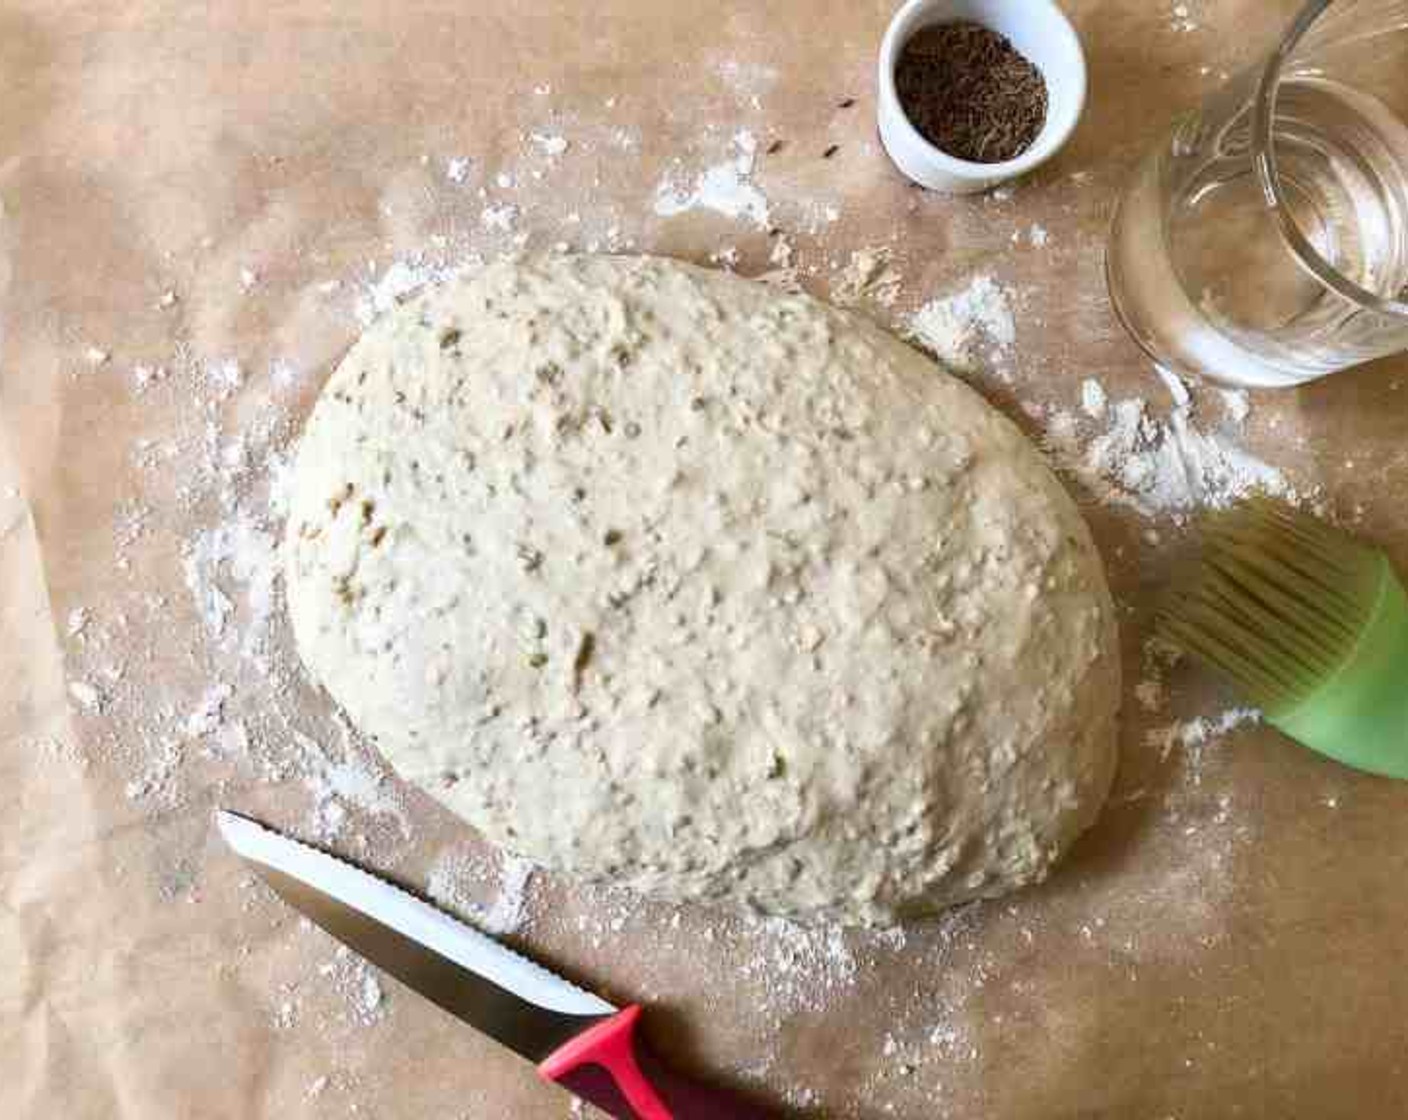 step 9 Elongate the ball to roughly form an oval loaf. By adding a generous amount of flour as you work, you are creating a “gluten cloak” on the surface of the wet dough so that it is easily shaped. Work quickly so that the entire process takes just 20 to 30 seconds. You don’t want to overwork the dough.